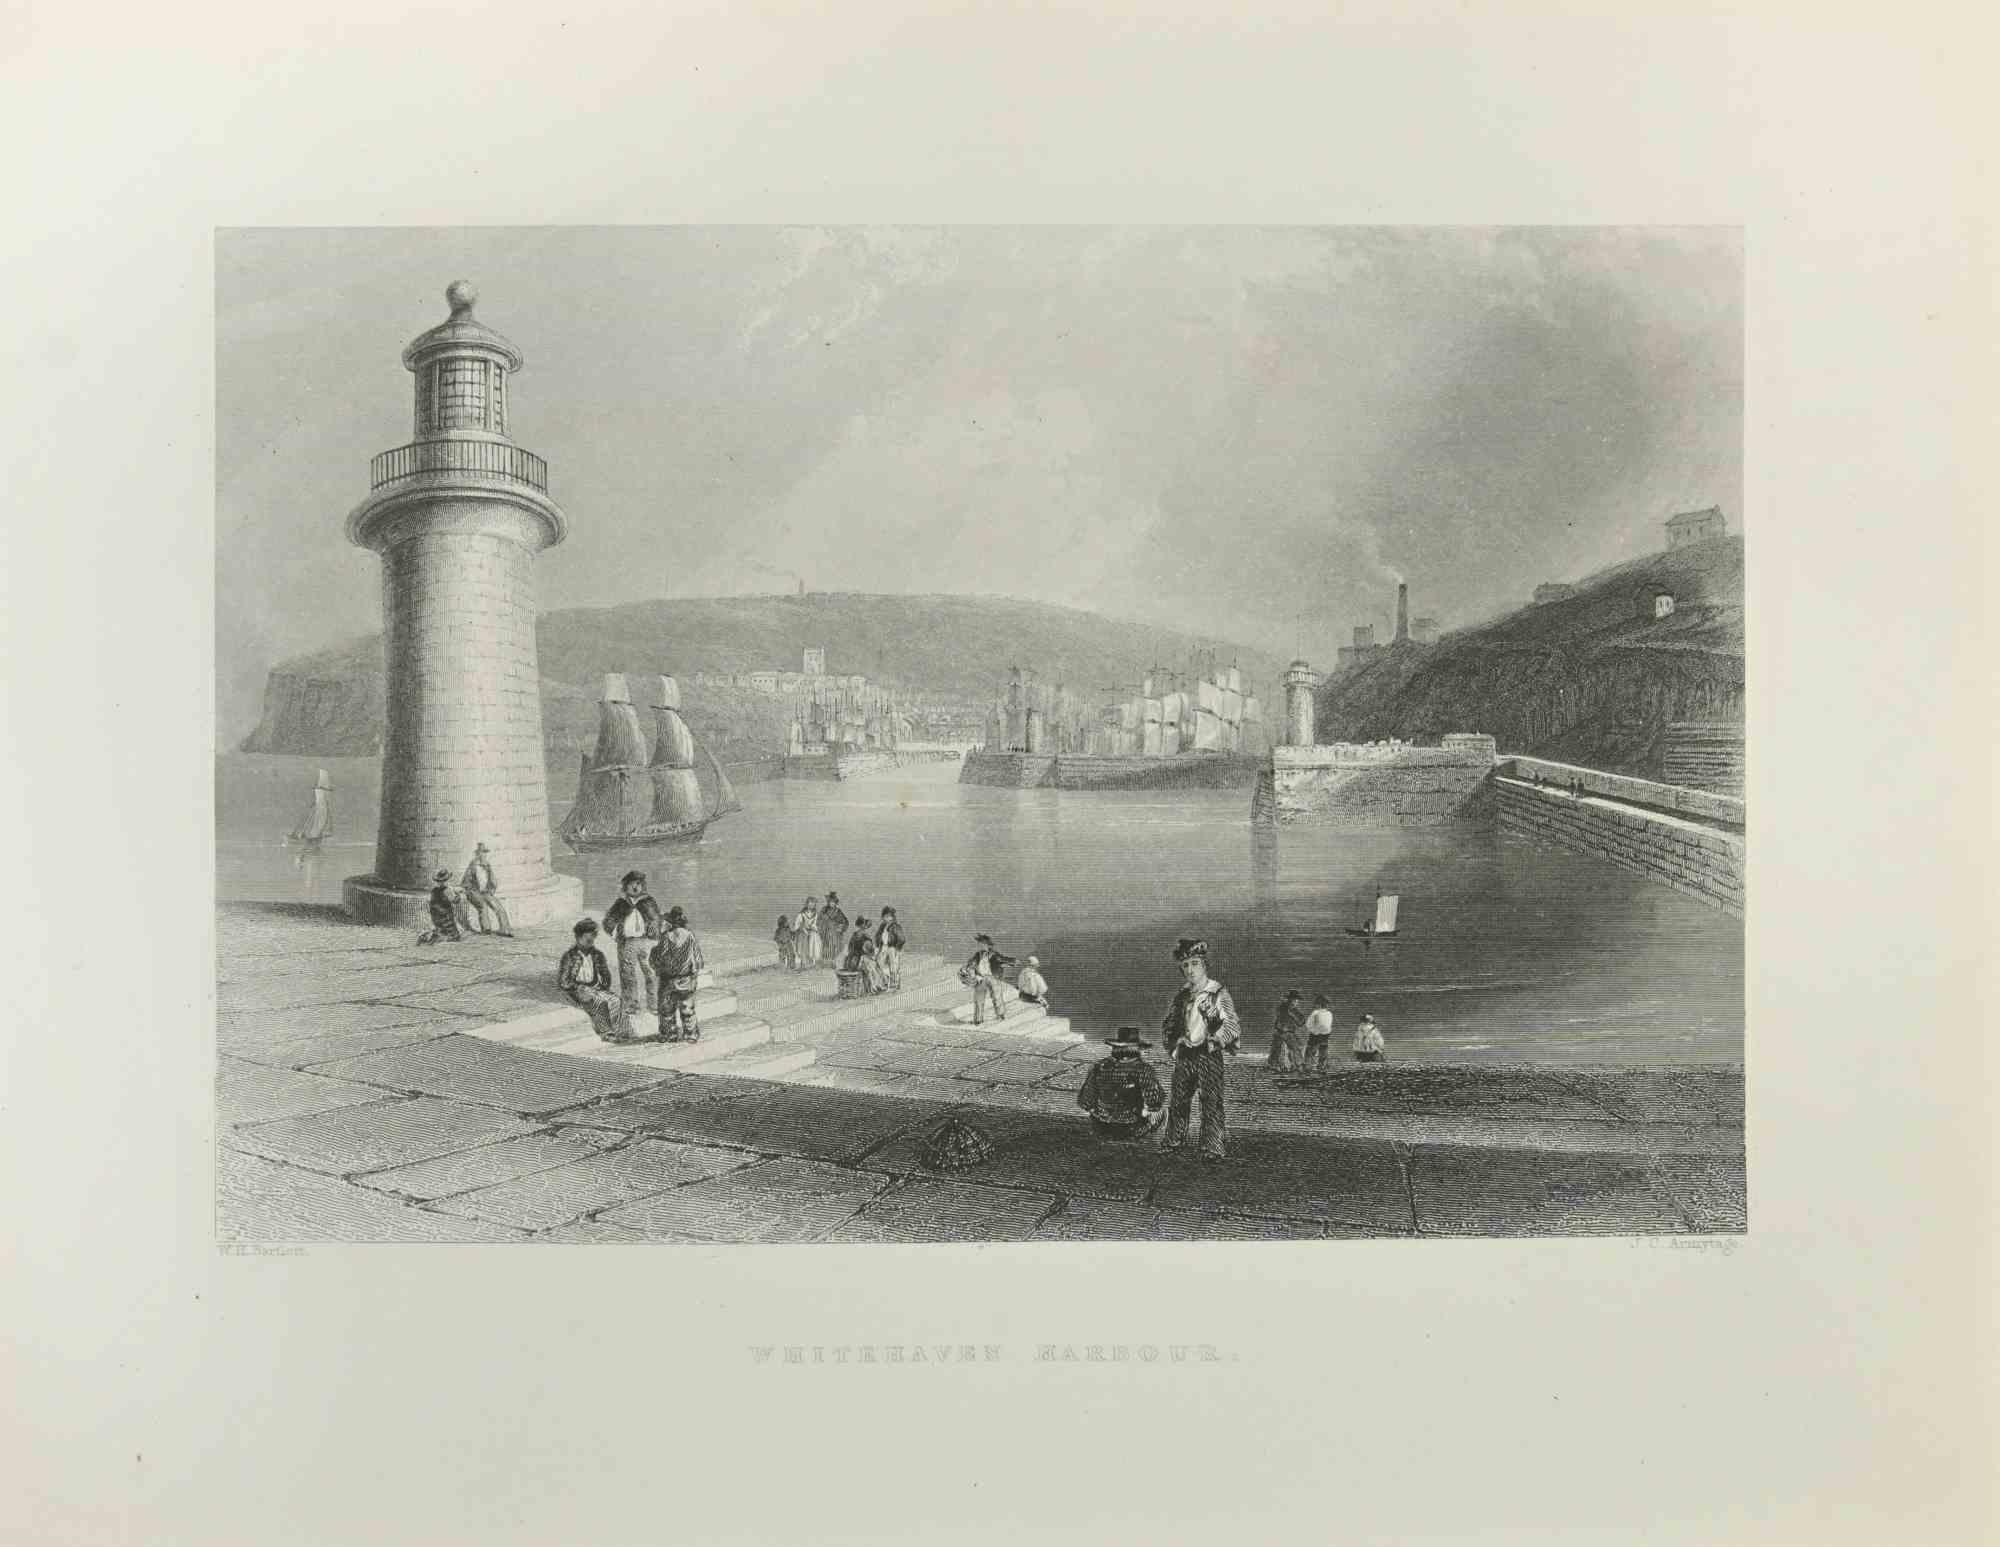 Whitehaven Harbour - Etching by J.C.Armytage - 1845